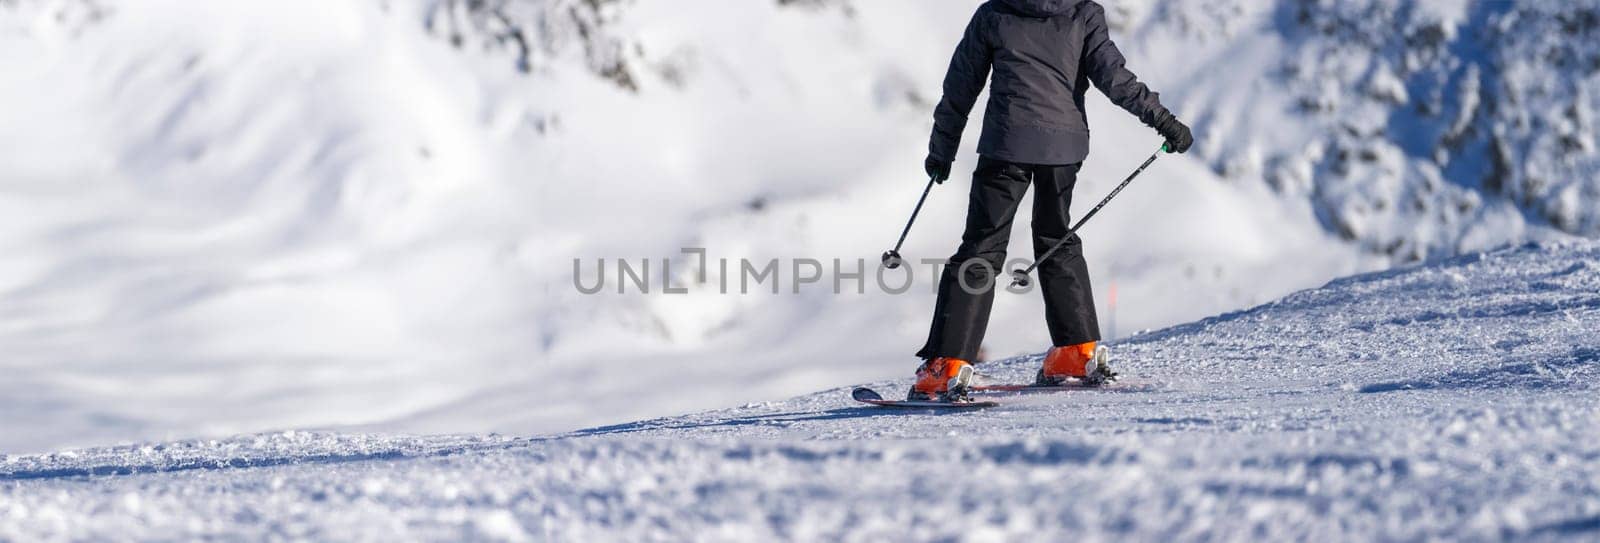 Winter Glide: Skiing the Alpine Slopes by Juanjo39